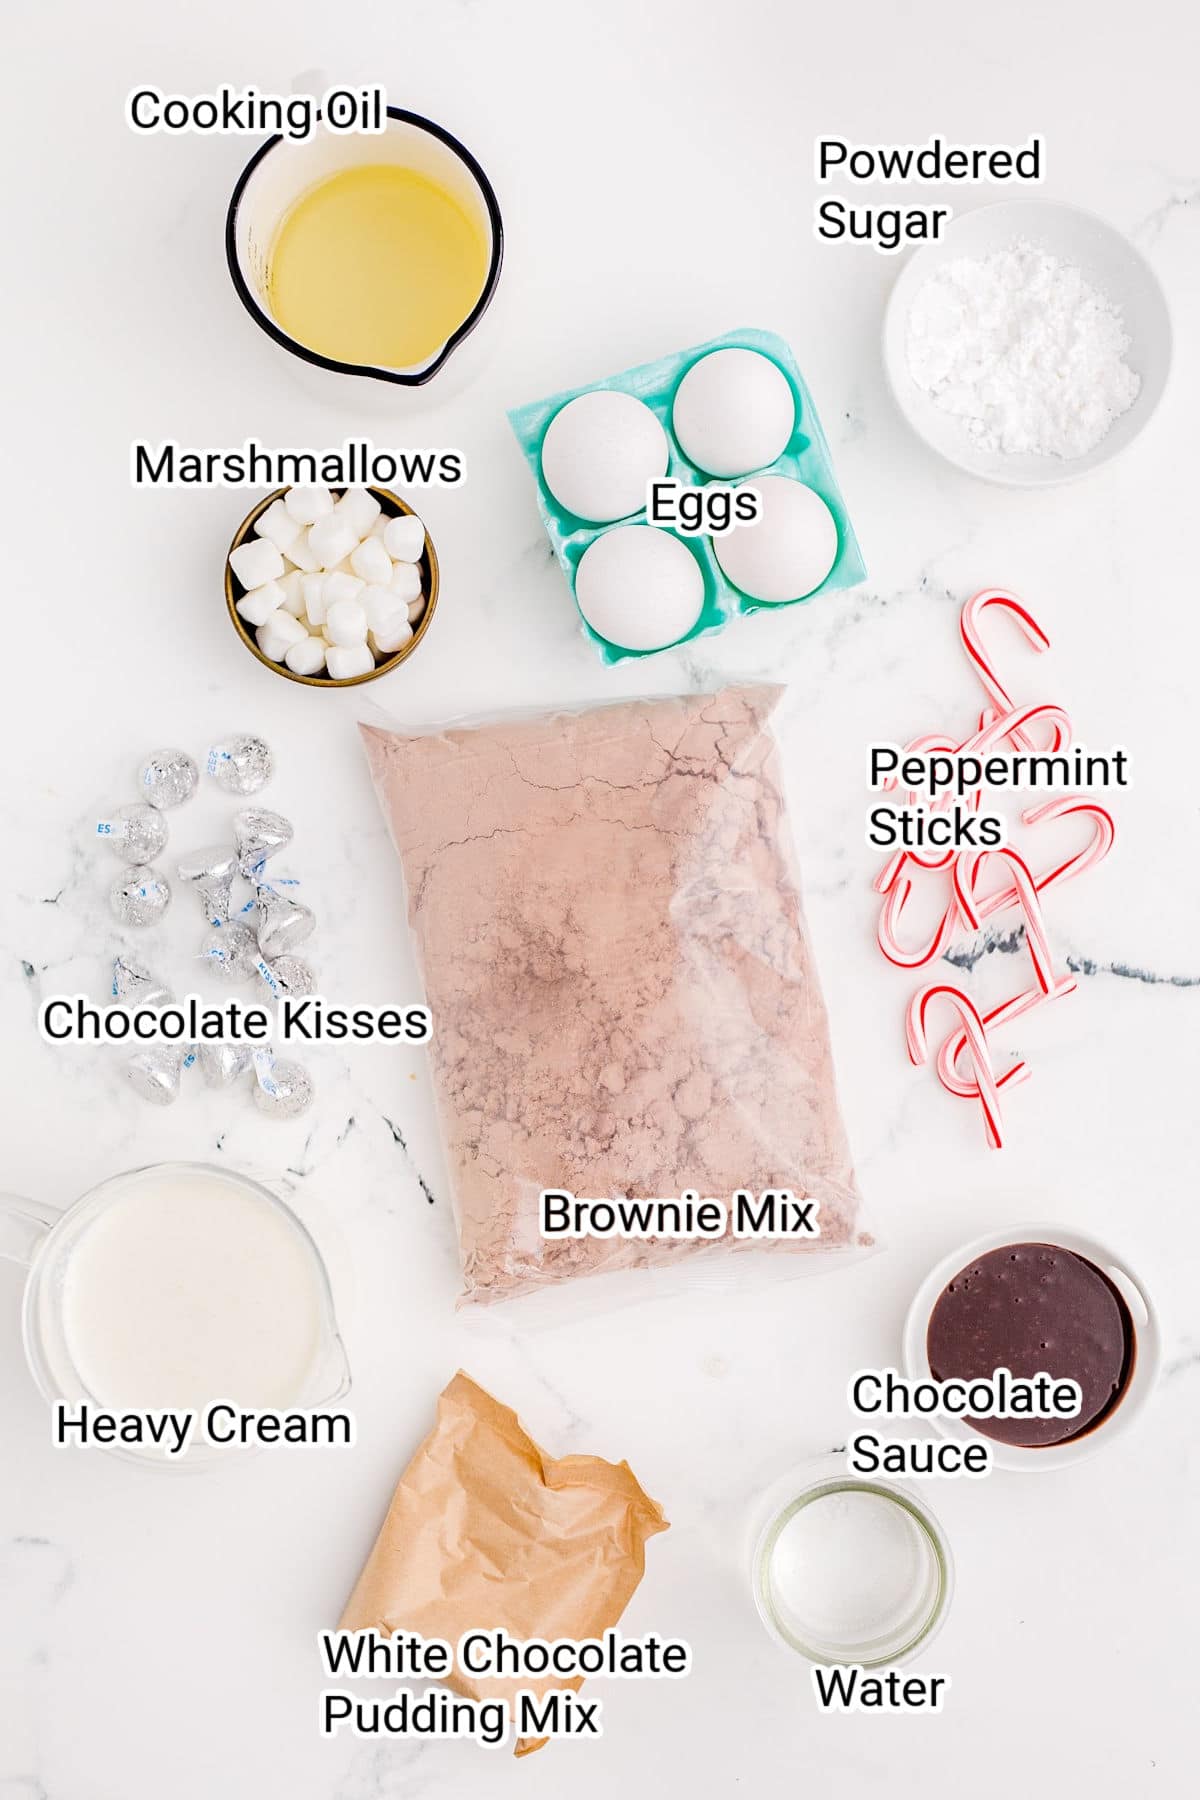 ingredients required for making hot chocolate brownie bites all laid out